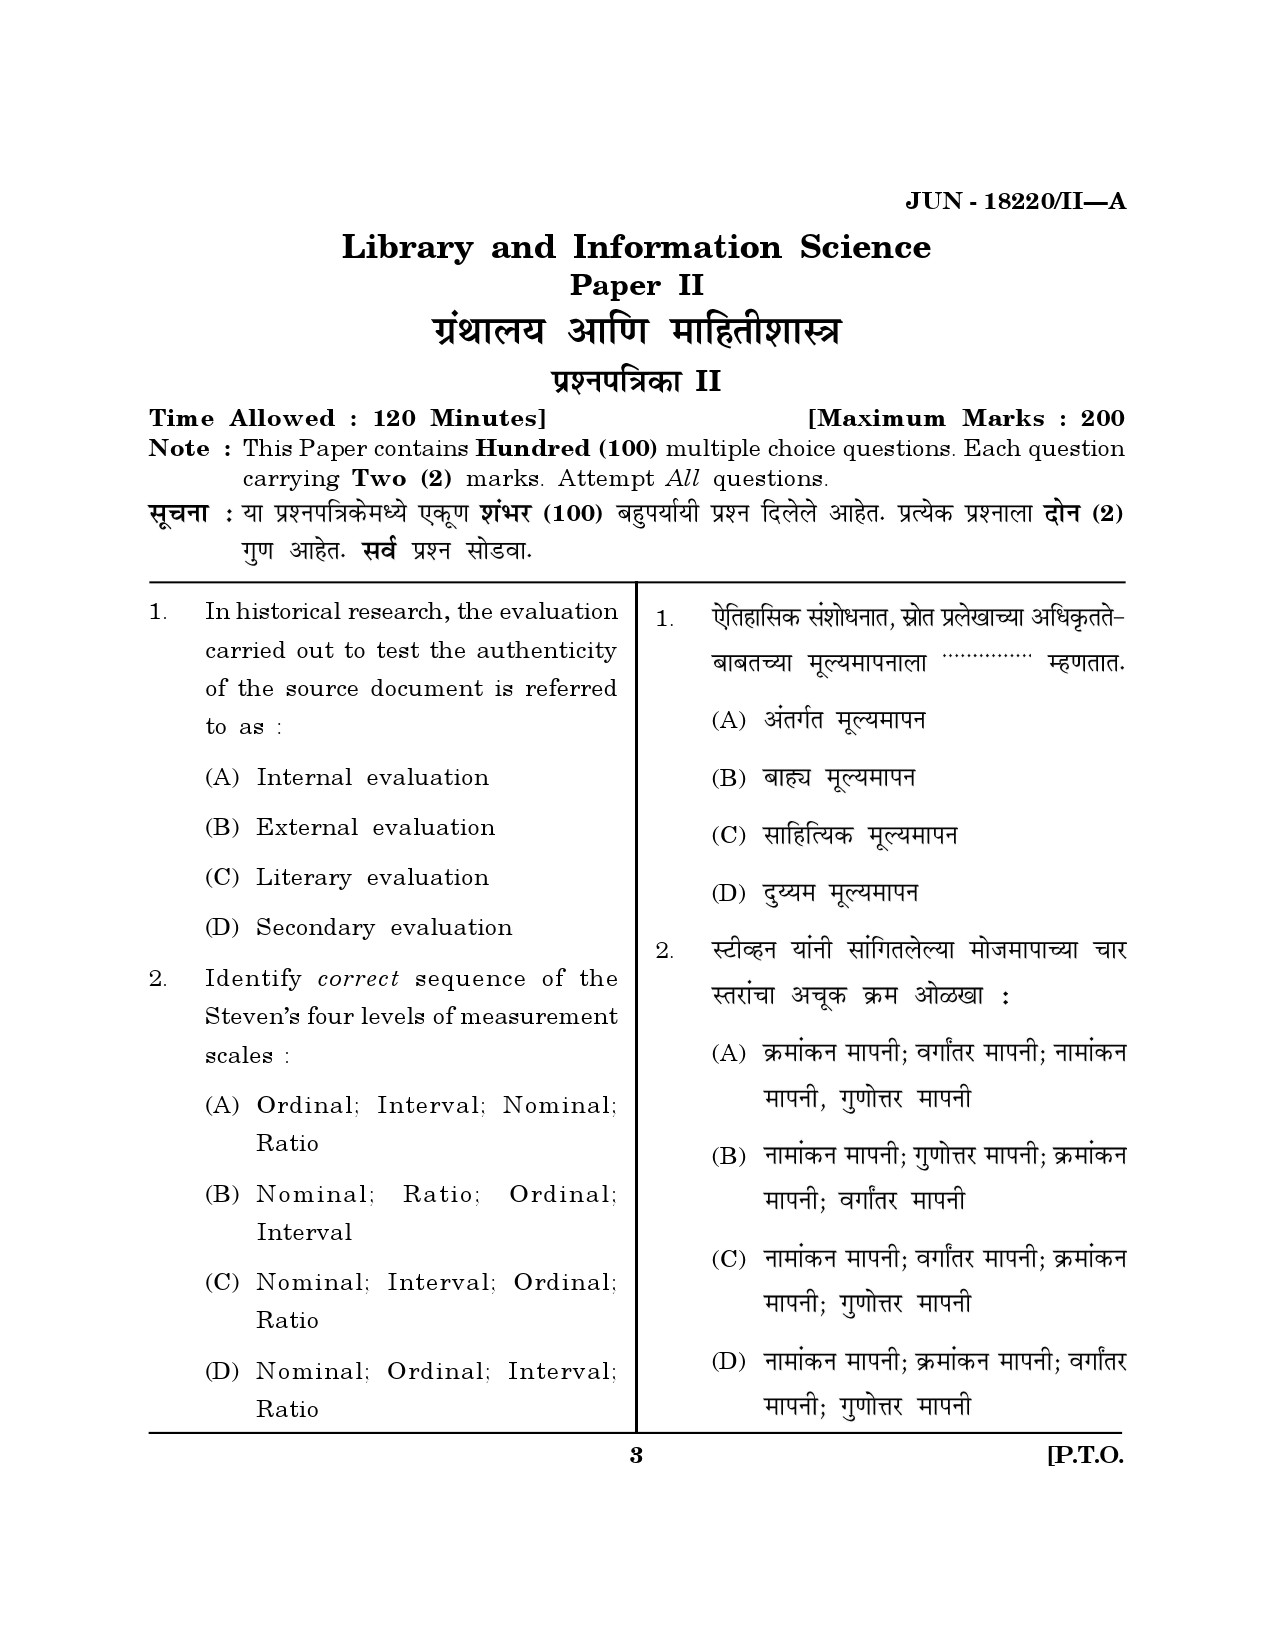 Maharashtra SET Library Information Science Question Paper II June 2020 2